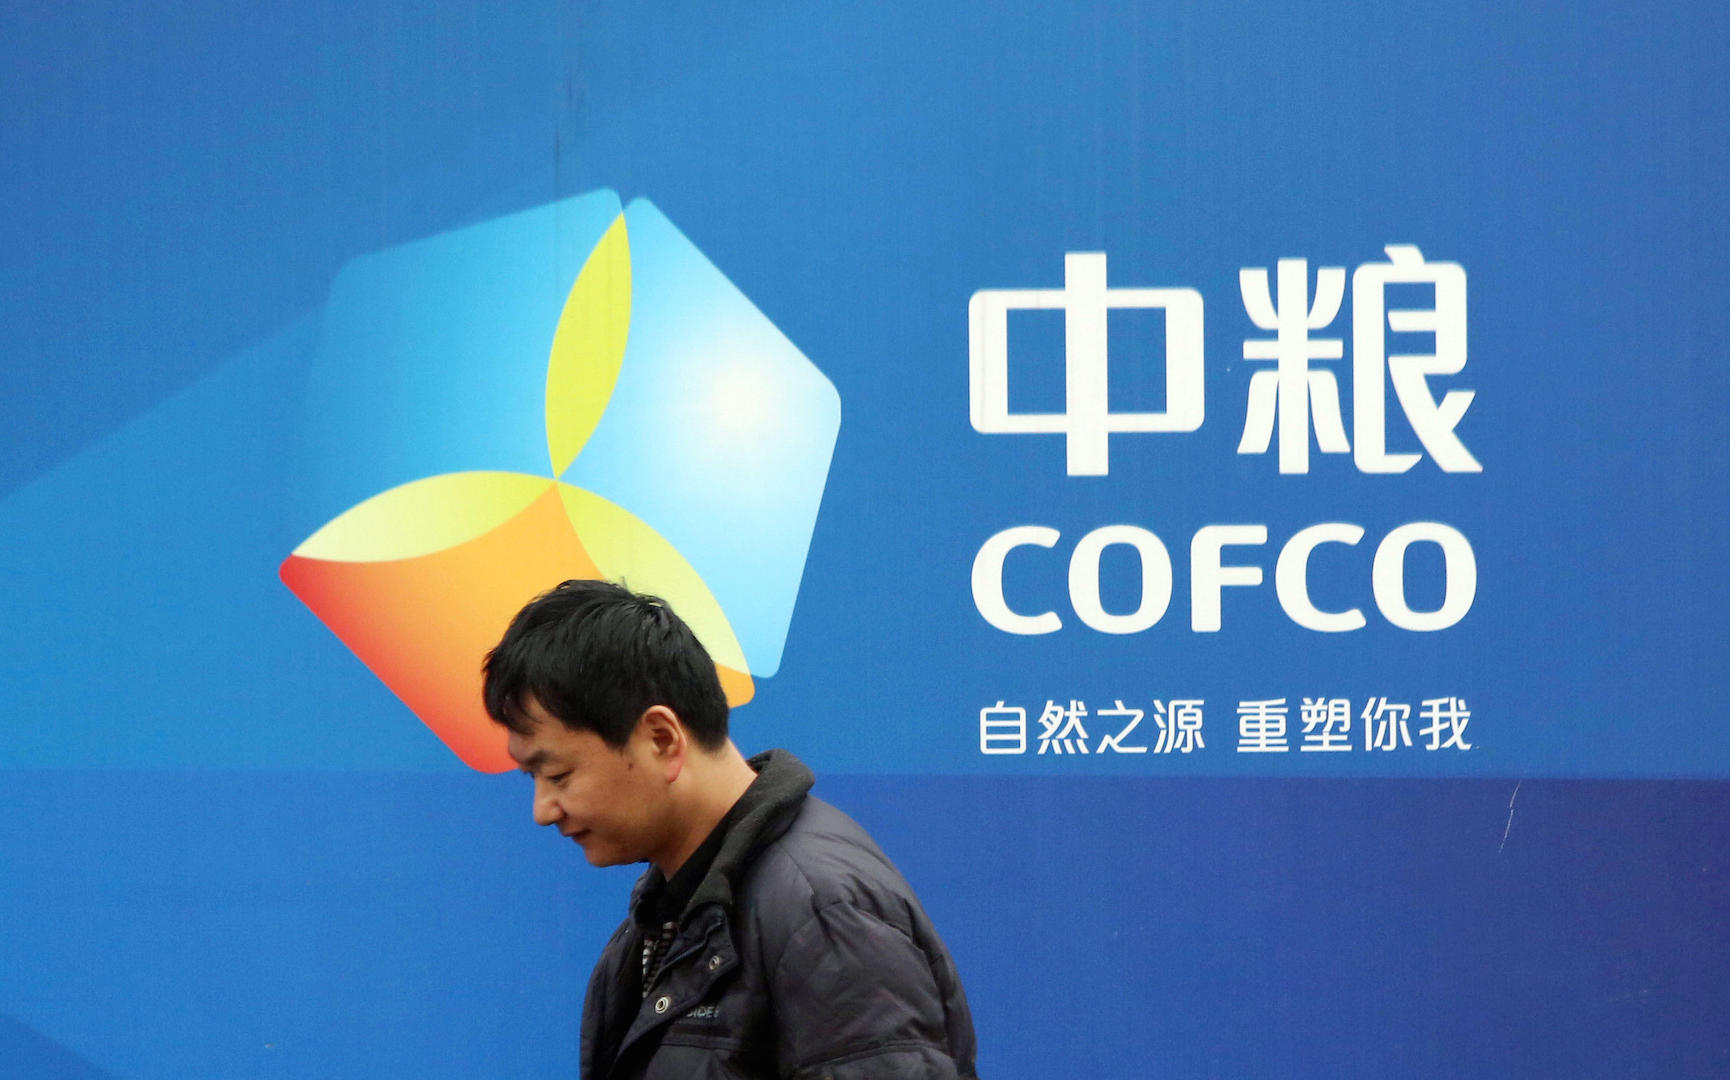 a Chinese man standing next to a Cofco poster